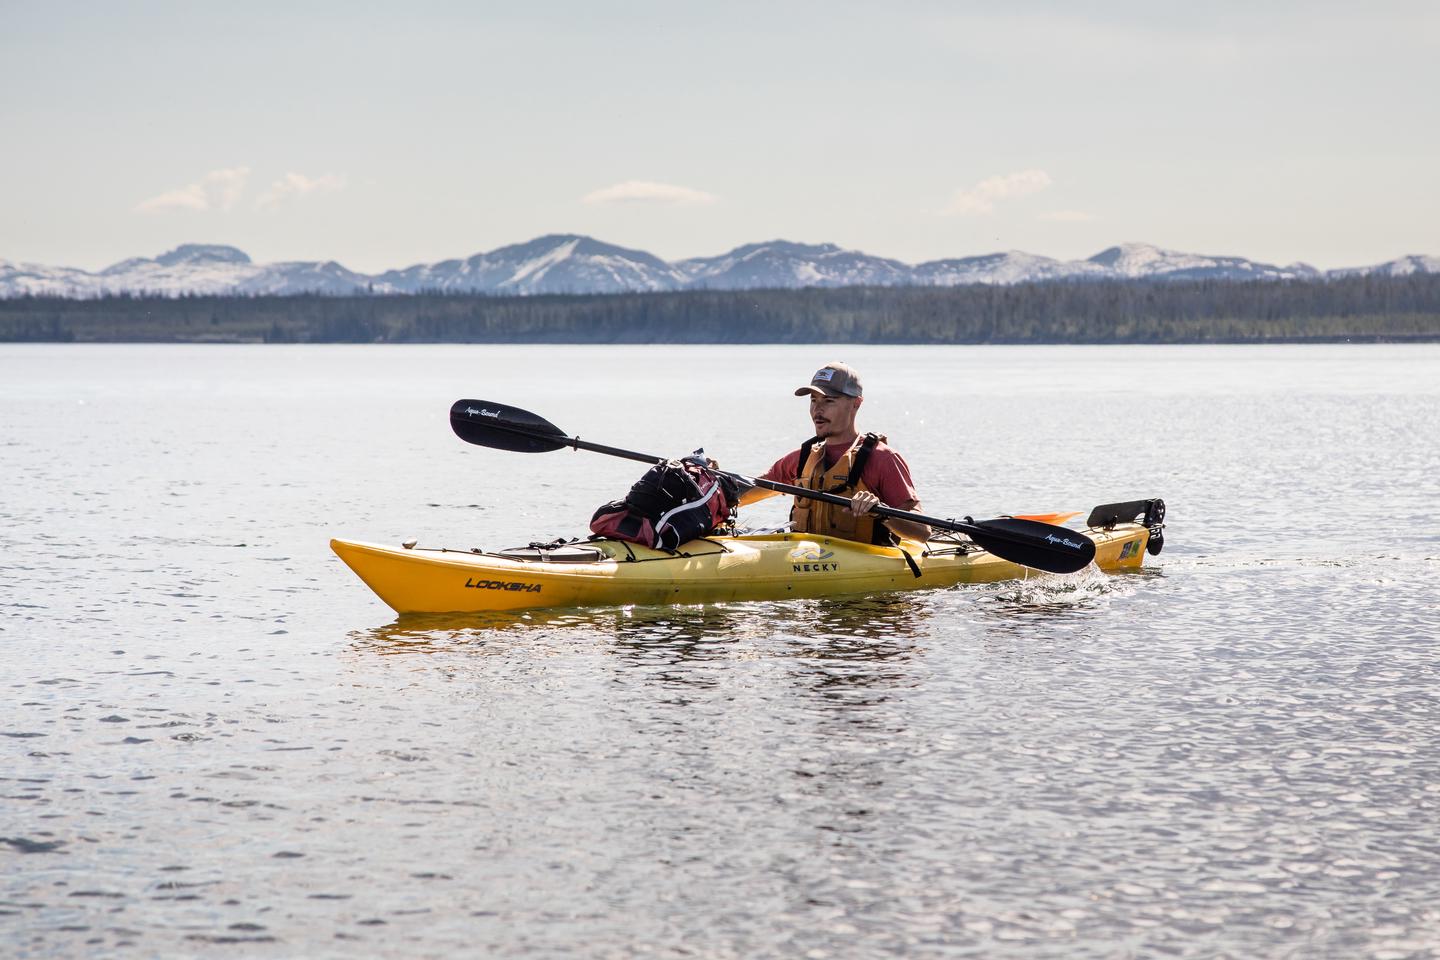 Sea kayaker in a yellow boat on a lake with mountains in the backgroundSea kayak on Yellowstone Lake